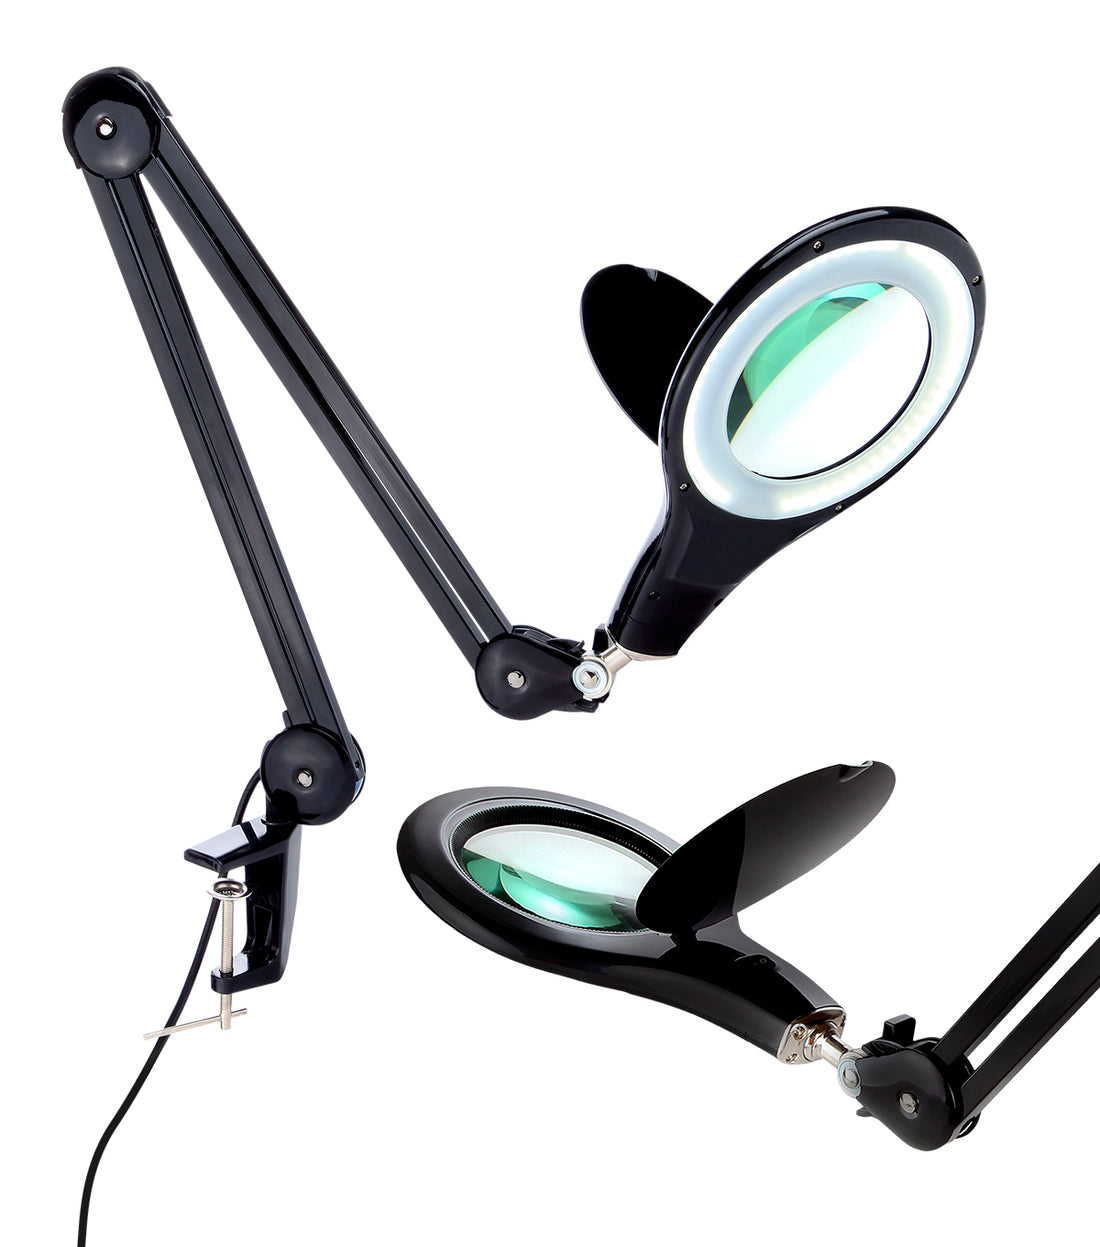 Brightech LightView PRO - Comfortable LED Magnifying Glass Desk